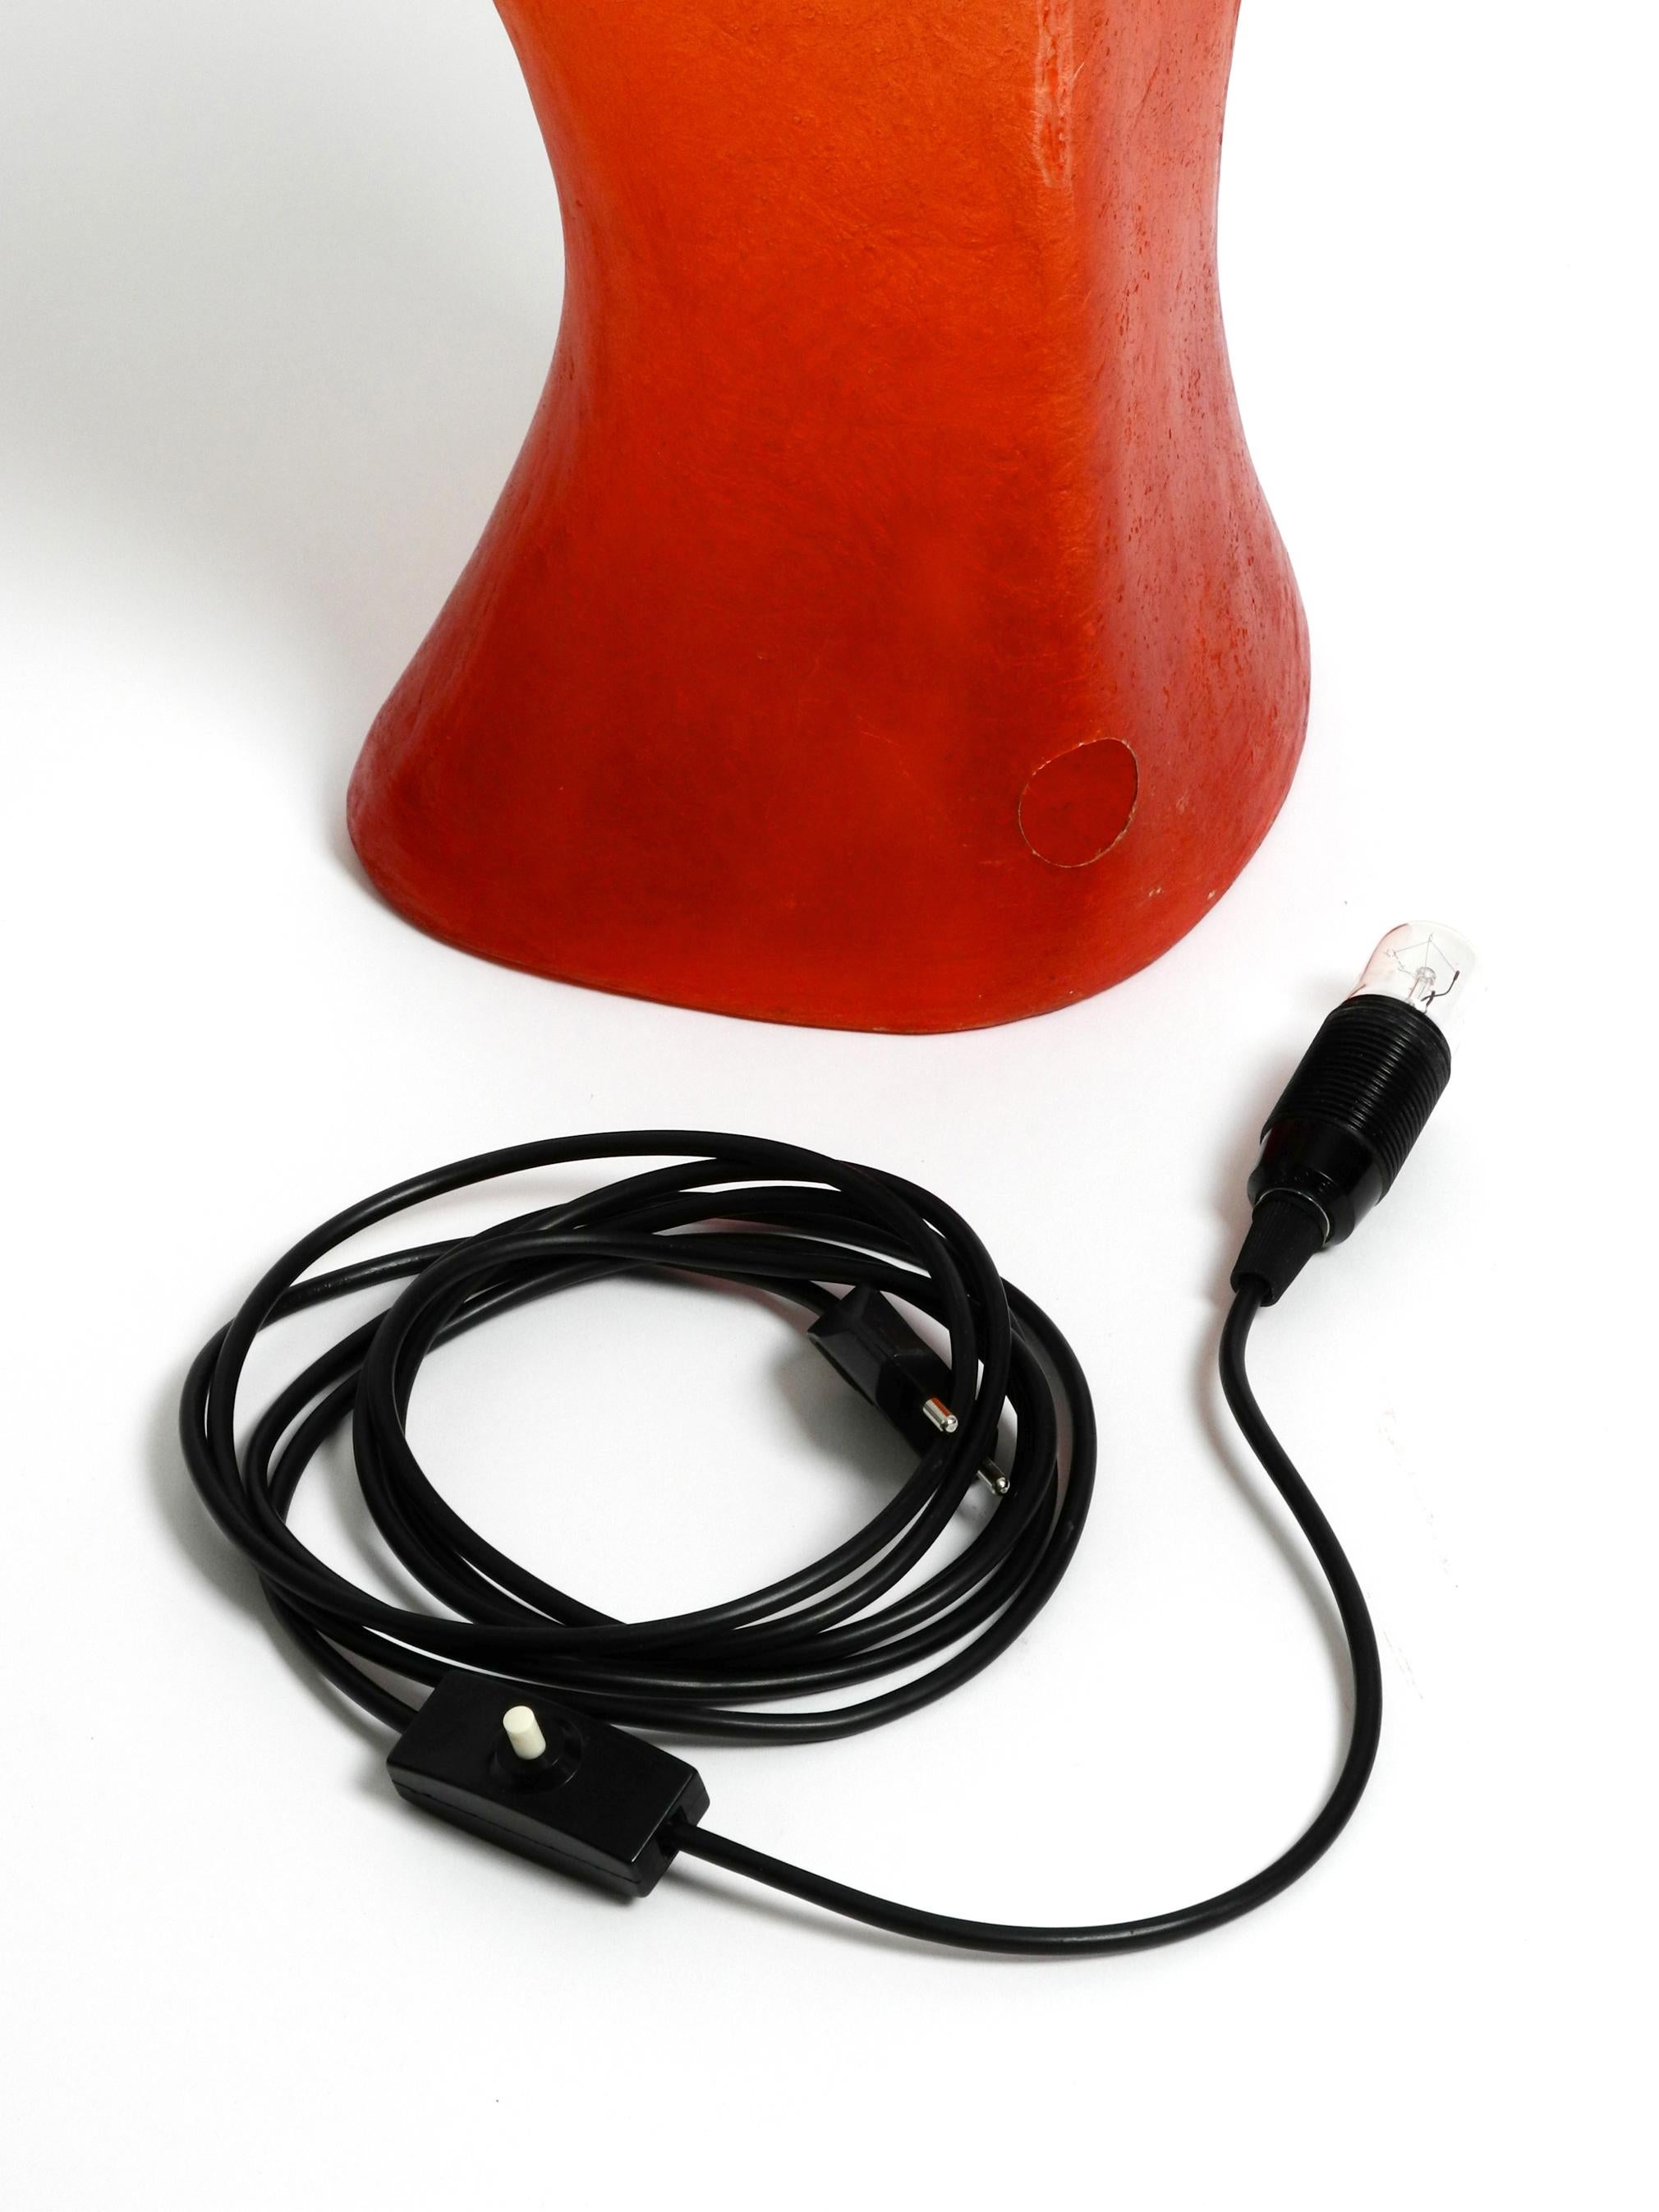 European Exceptional 1960s Woman Torso Table Lamp Made of Fiberglass in Red For Sale